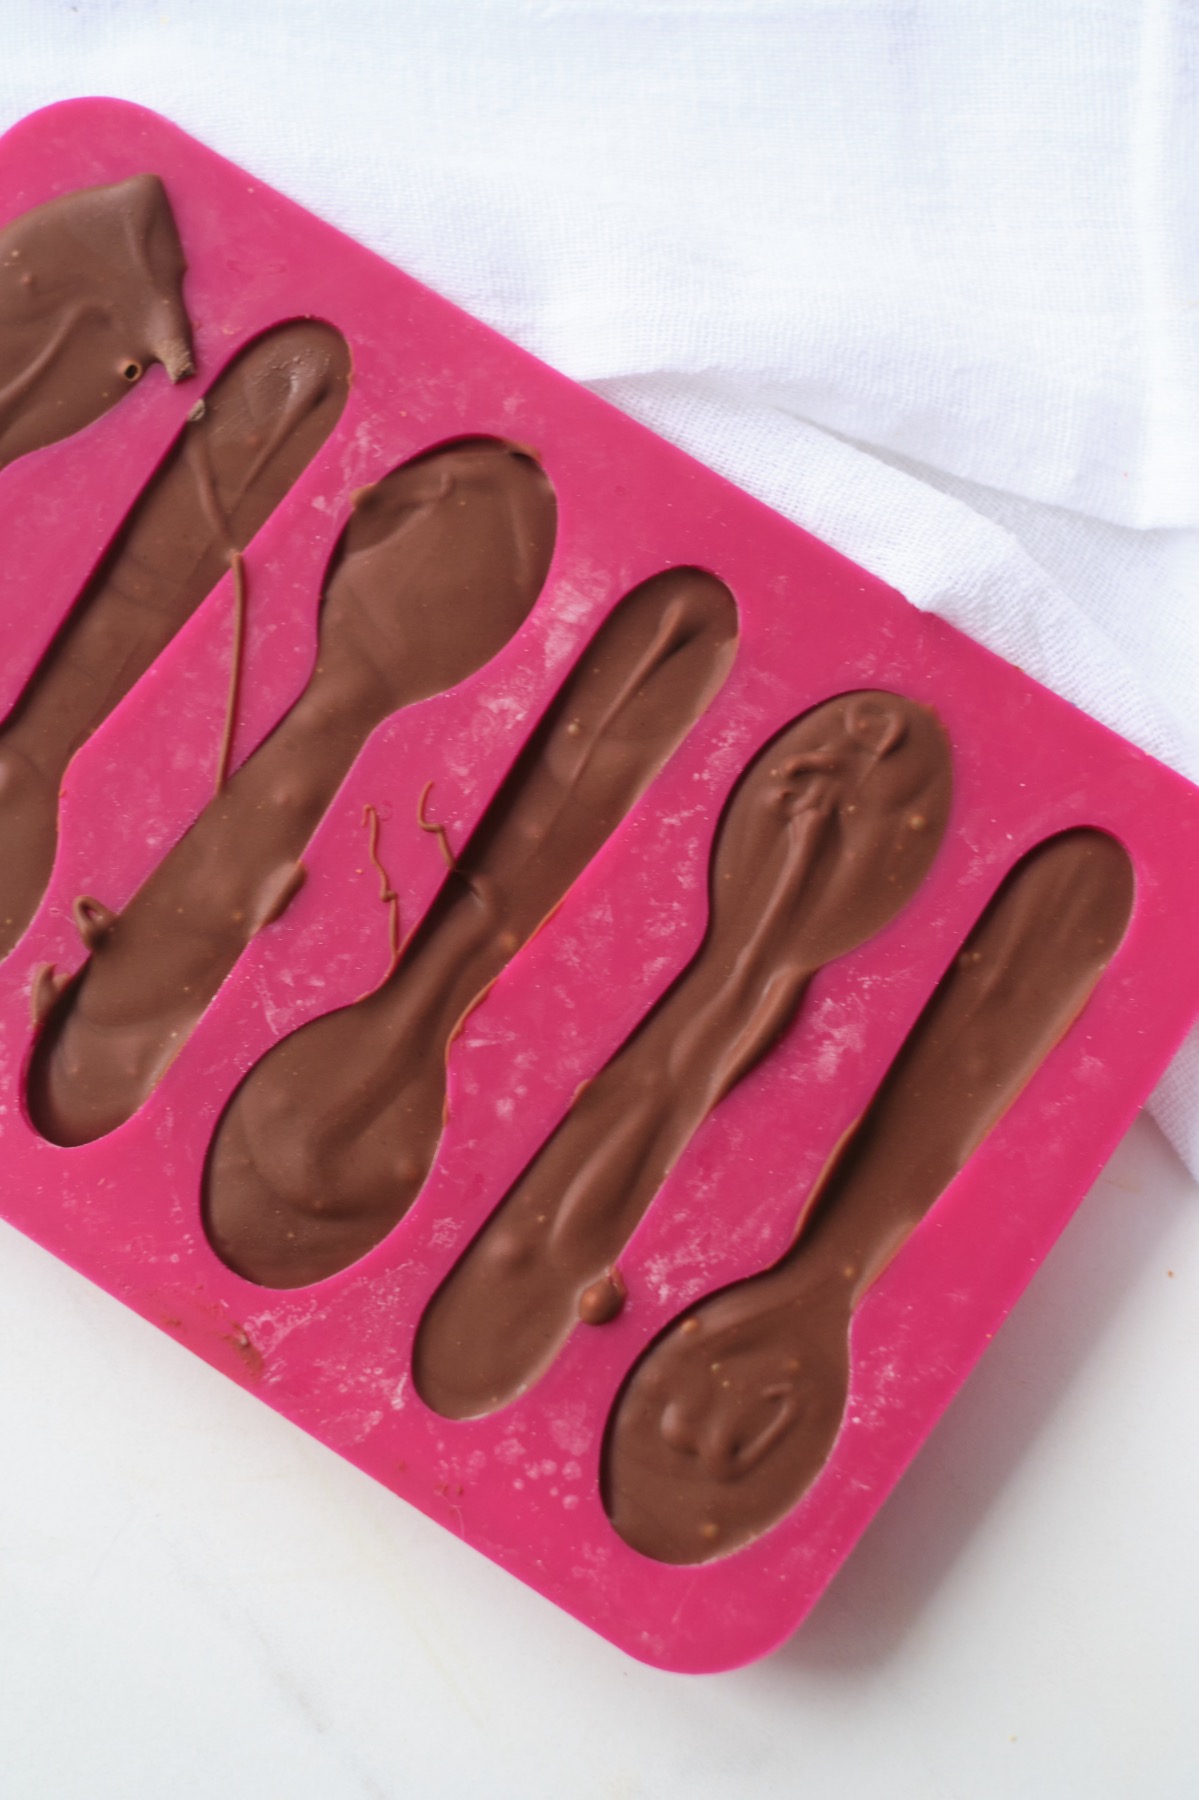 pour the chocolate in the spoon molds